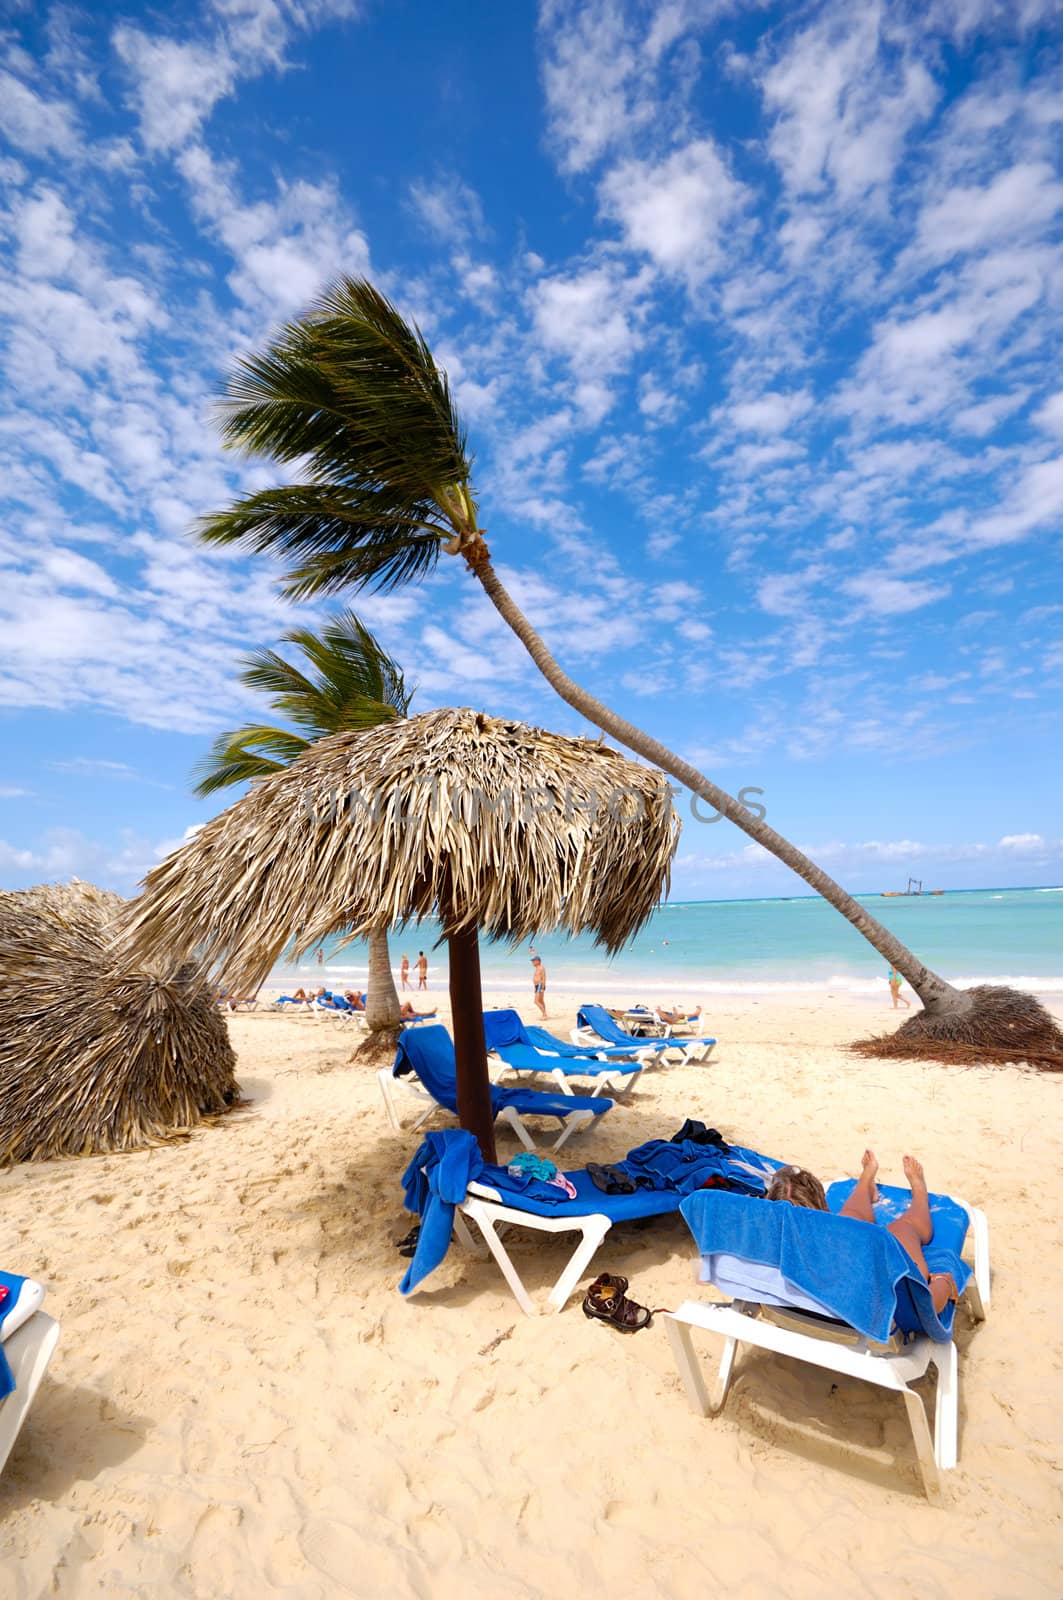 Sunbeds and parasol on an exotic beach. Dominican Republic, Punta Cana.